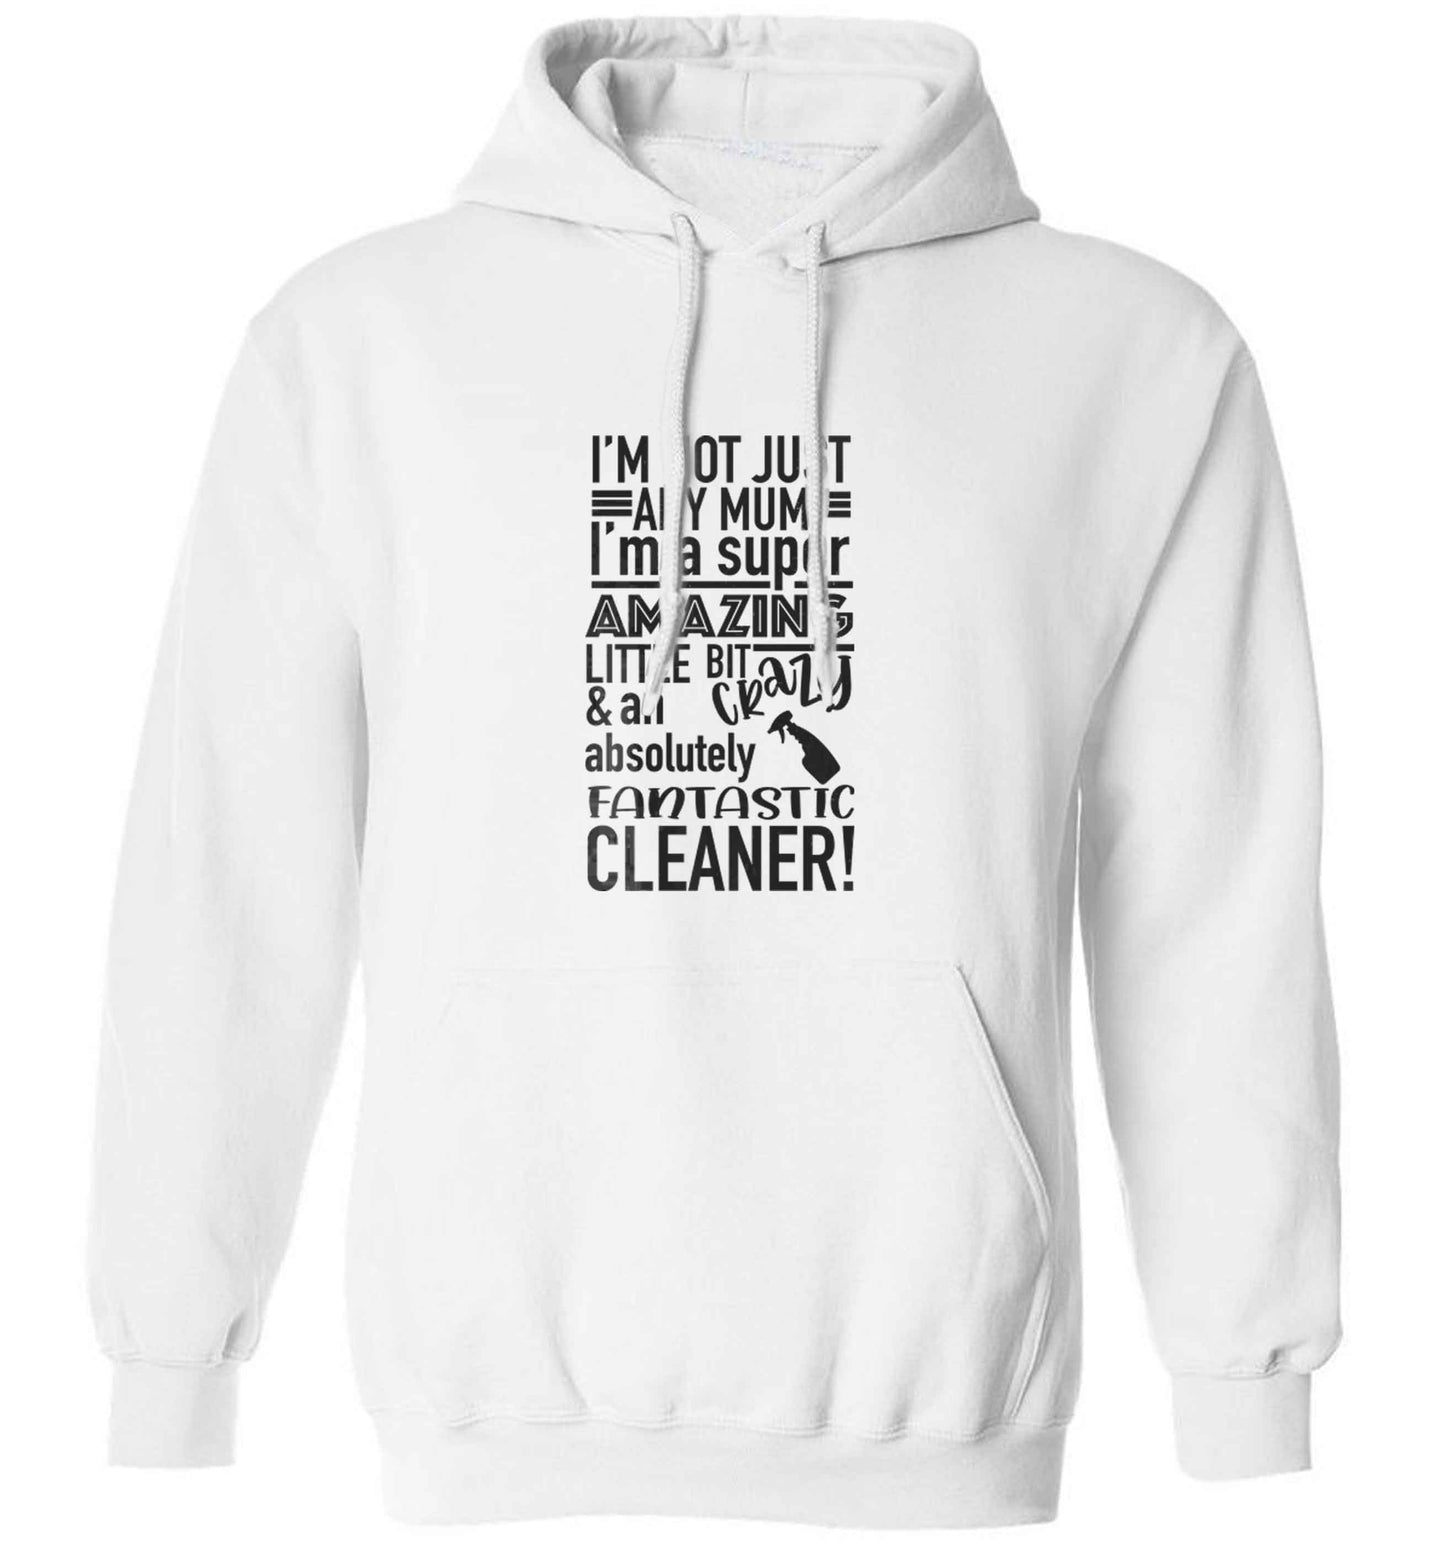 I'm not just any mum I'm a super amazing little bit crazy and an absolutely fantastic cleaner! adults unisex white hoodie 2XL